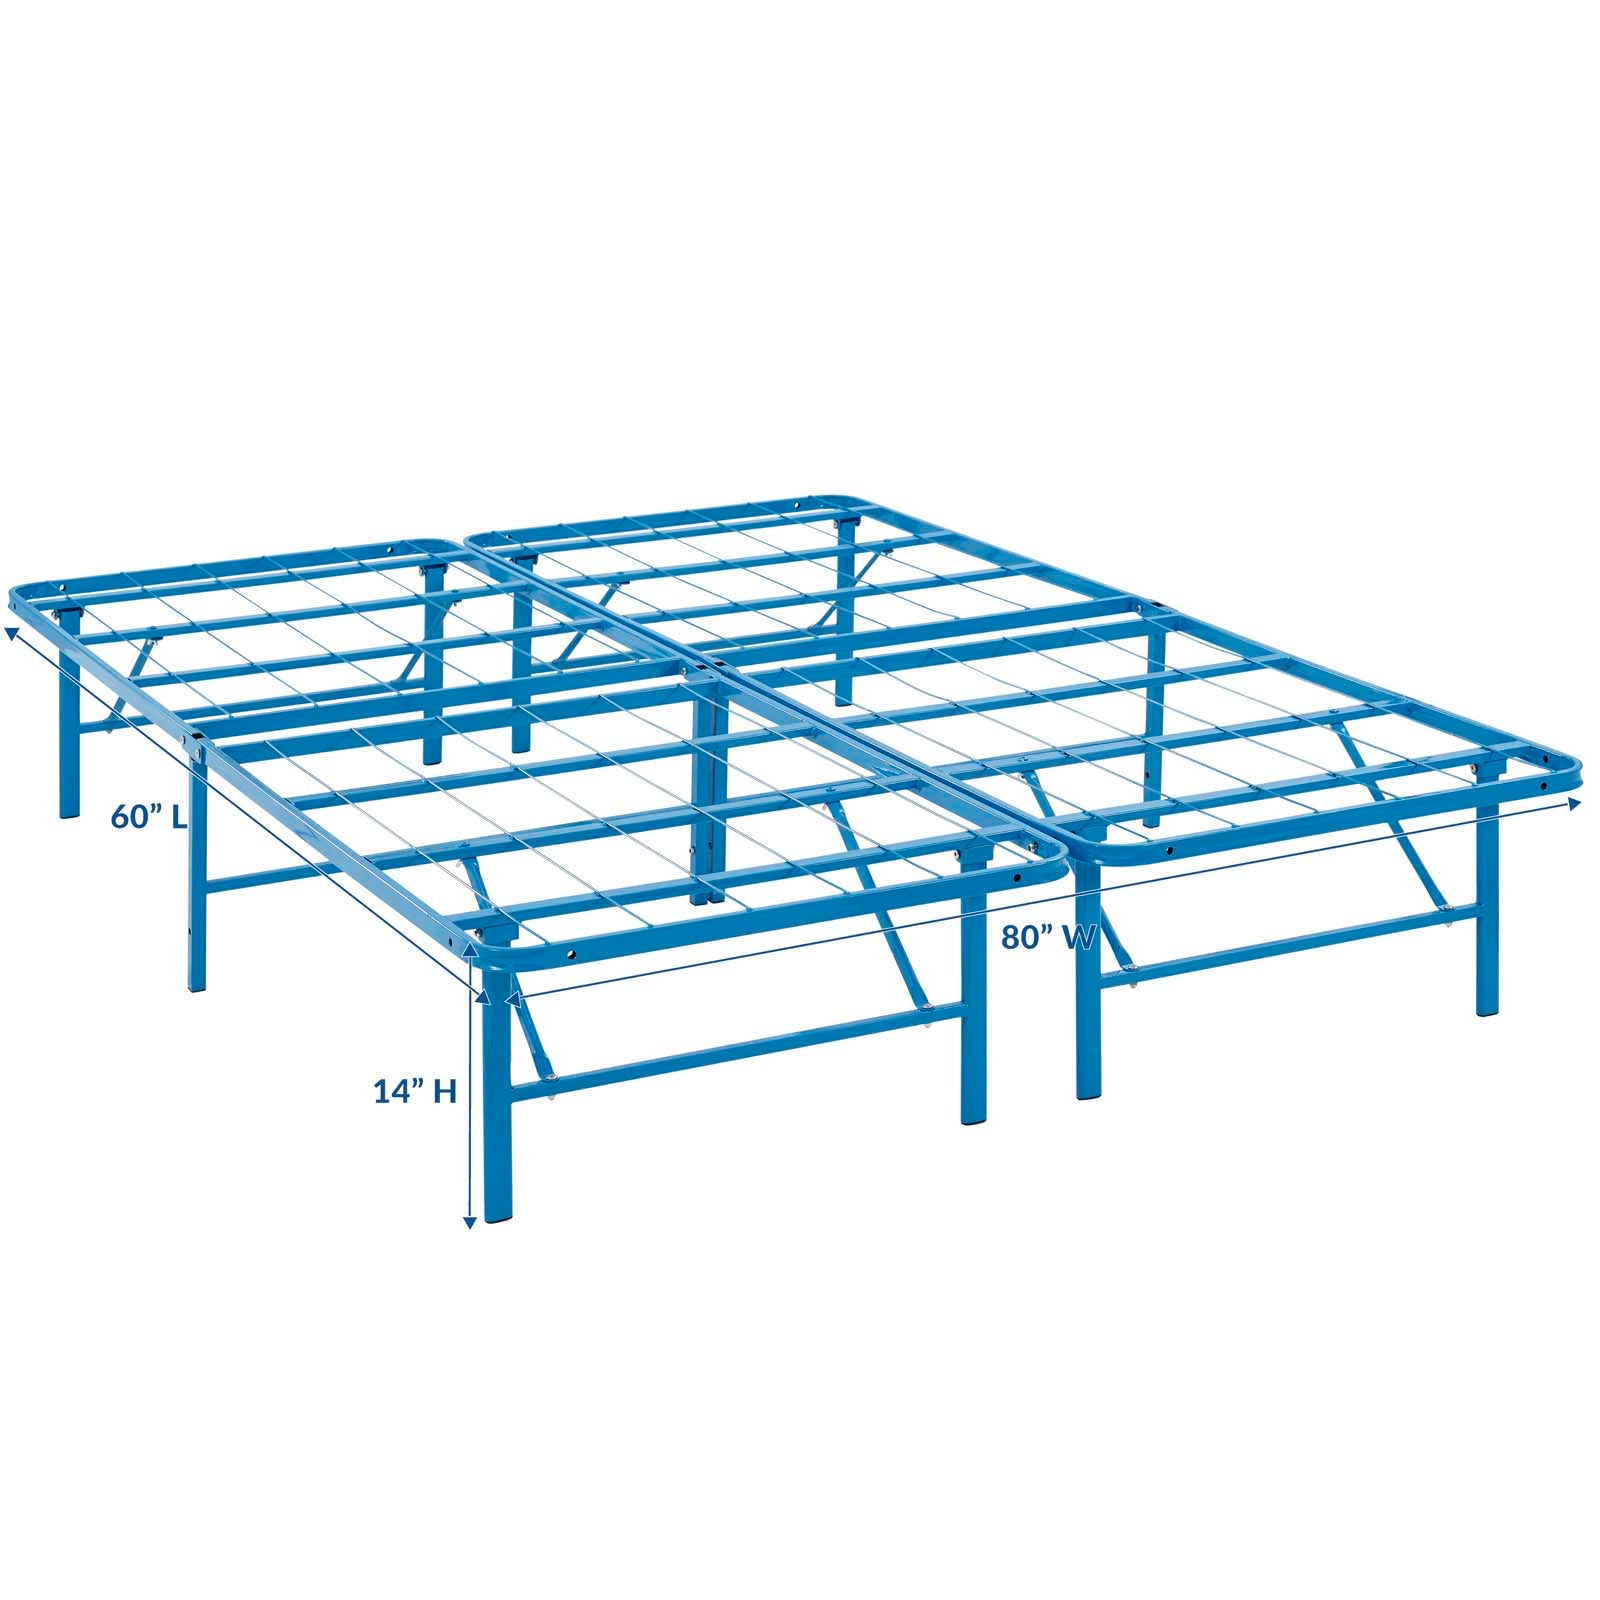 Modway Beds - Horizon Queen Stainless Steel Bed Frame Light Blue